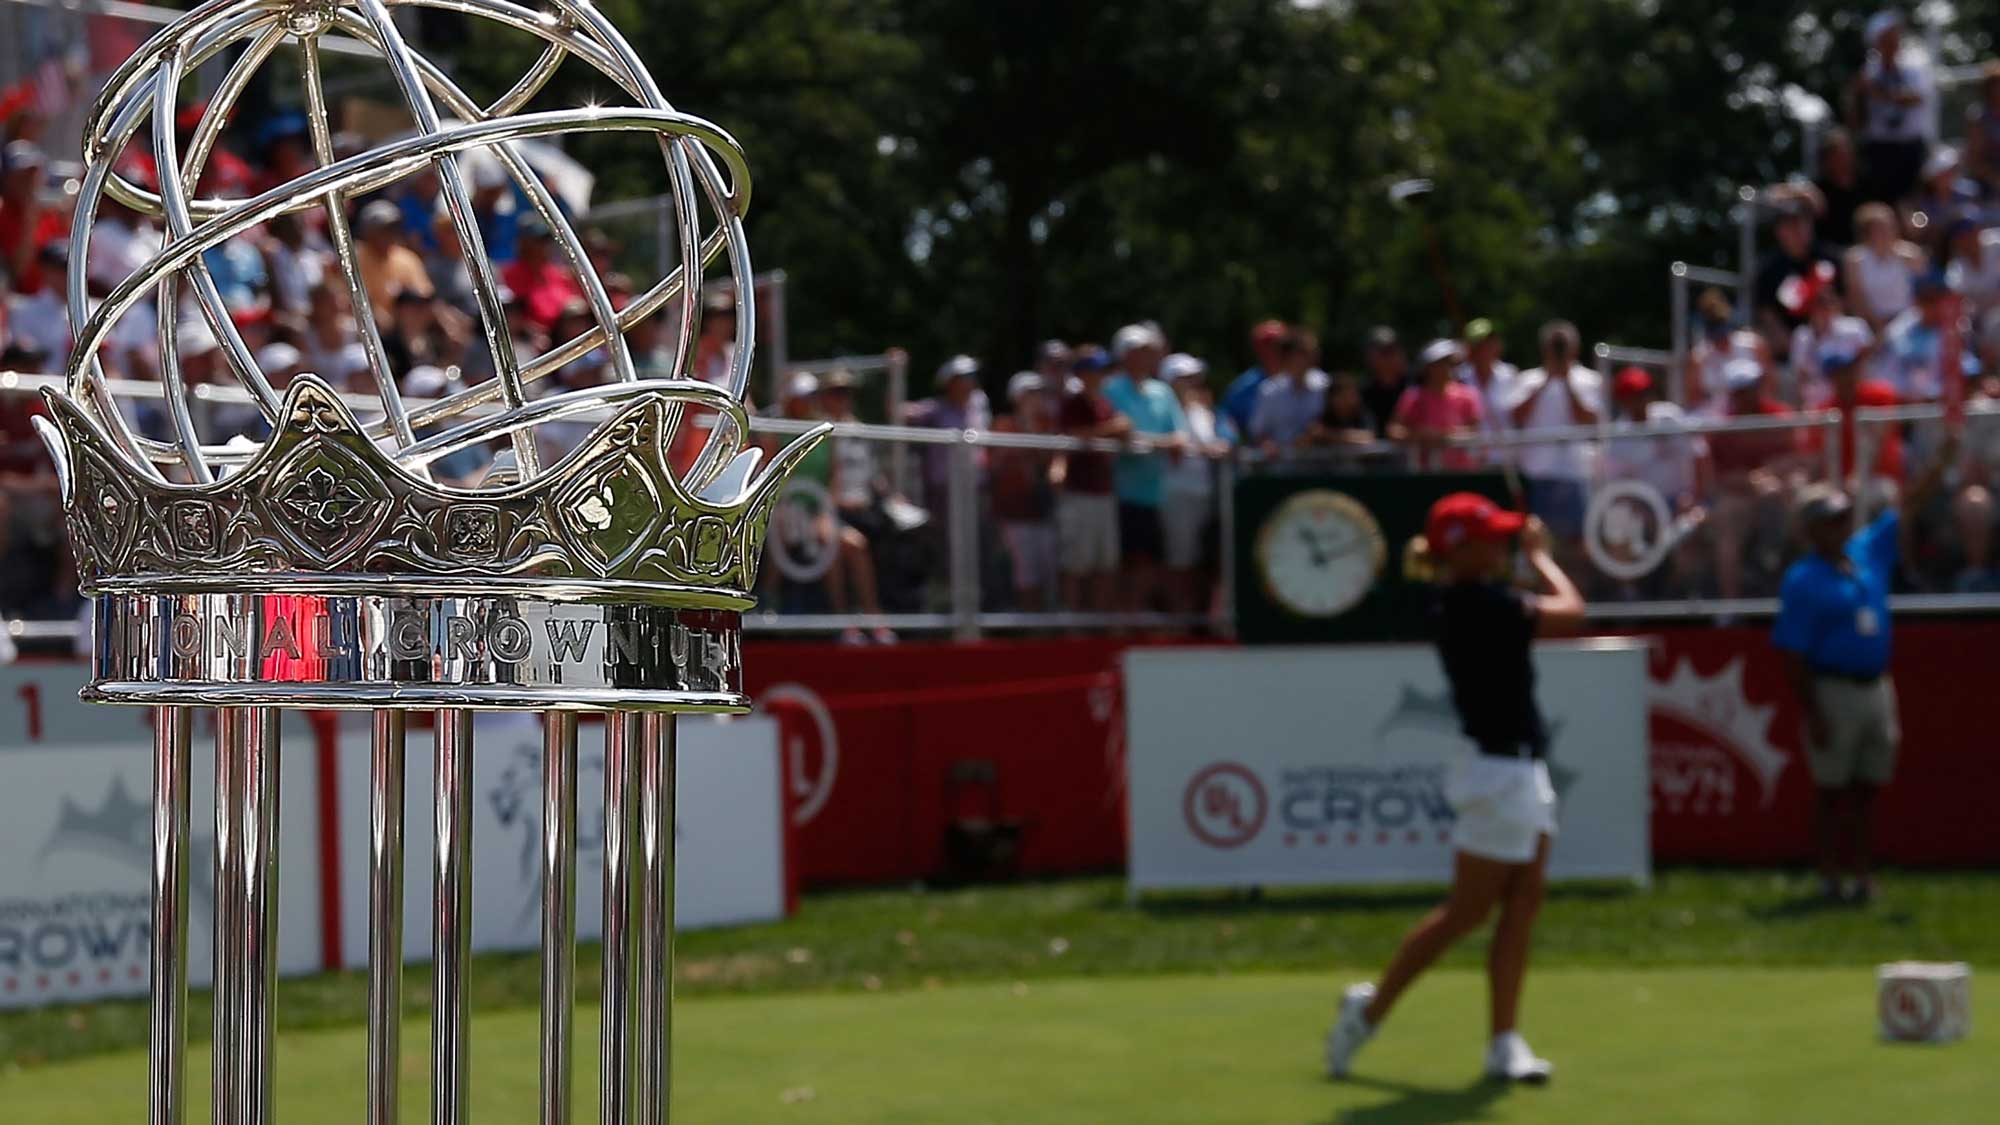 A detailed view of the championship trophy as Stacy Lewis of the United States hits her tee shot on the first hole during the singles matches of the 2016 UL International Crown